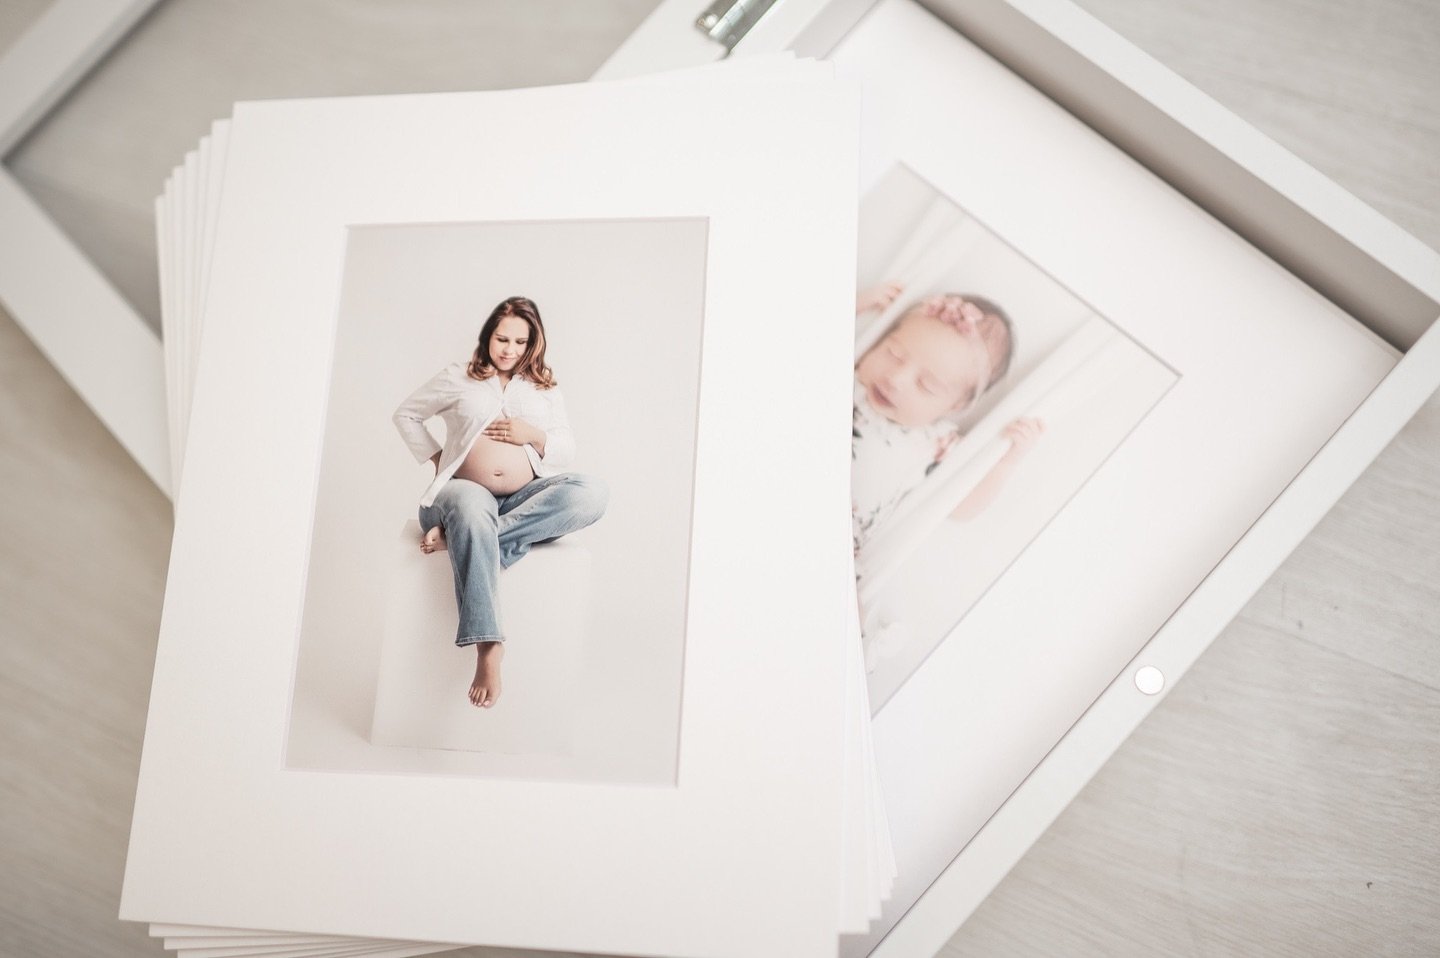 The glass box I offer during maternity and newborn orderings includes up to 15 matted prints. Perfect for your own custom framing. You can even choose to split these between your maternity and newborn sessions. I never recommend printing through drug